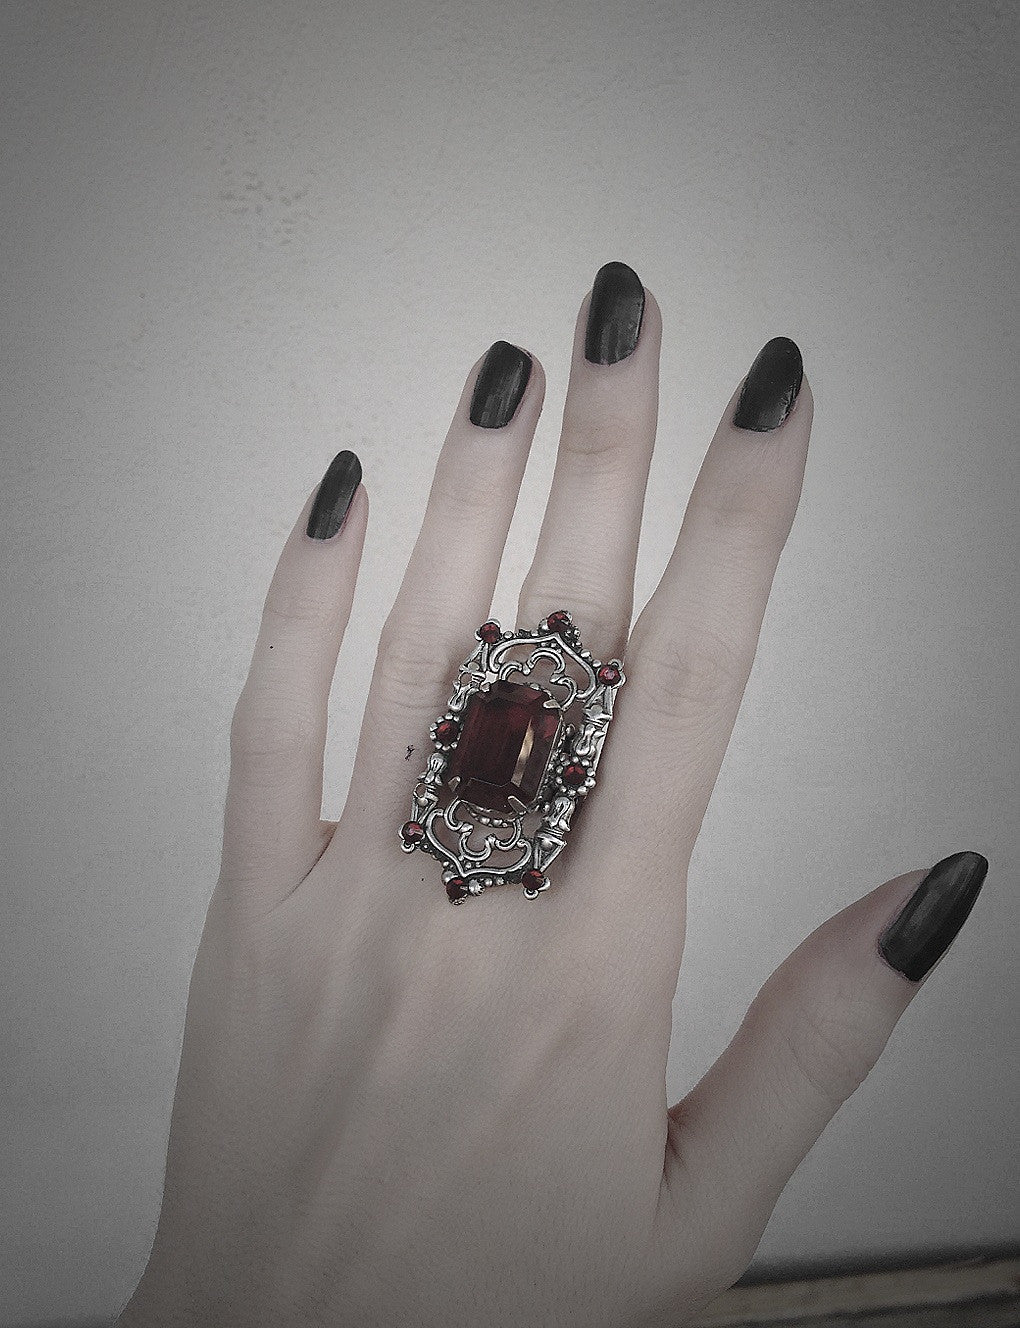 Gothic Cathedral Ring - Aranwen's Jewelry
 - 4